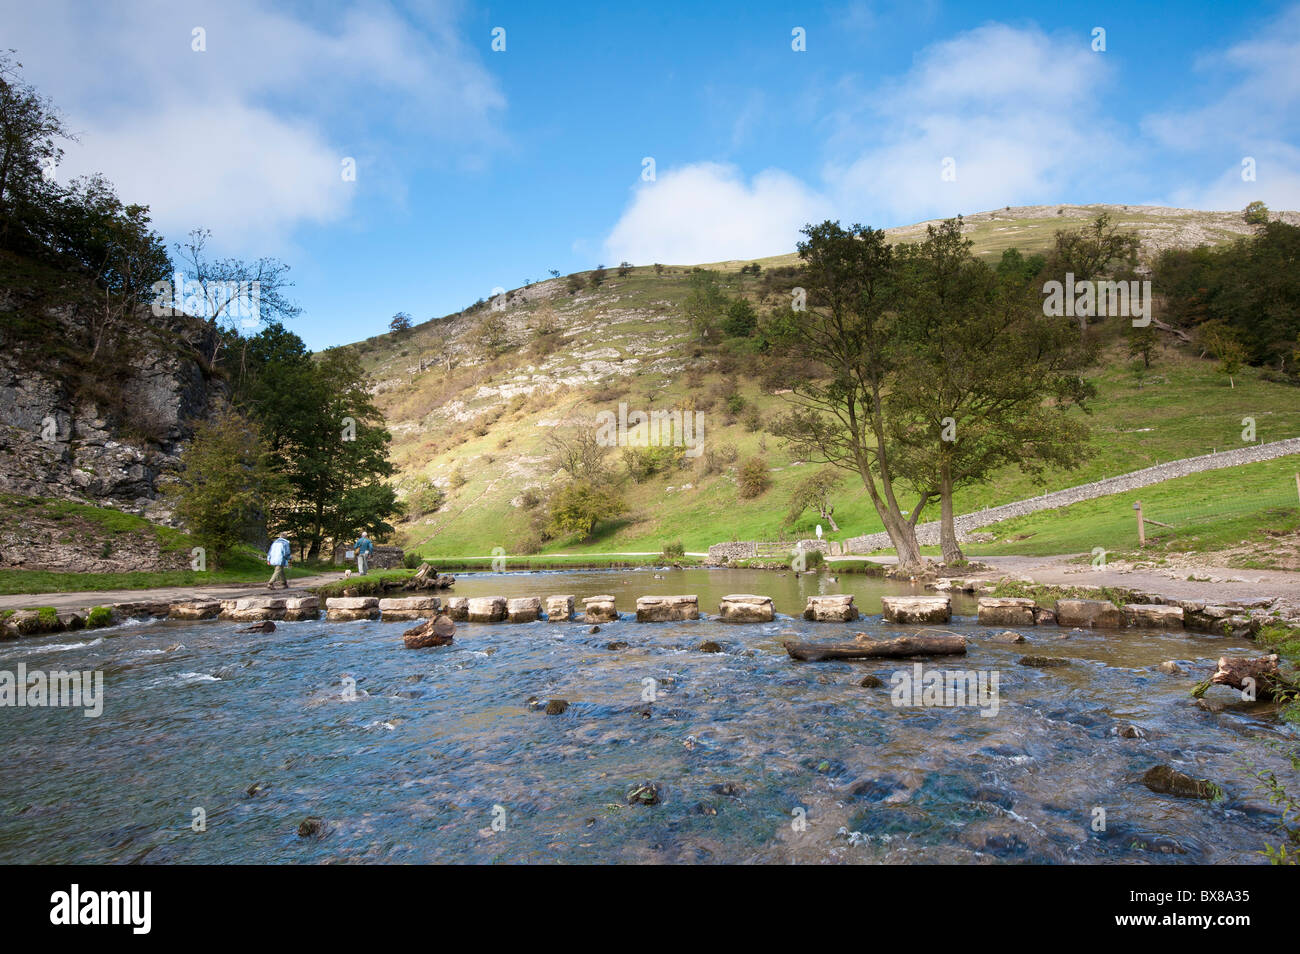 Dovedale in the Peak District with the stepping stones shown that are used for crossing the River Dove. Dovedale is a very popular area for visitors. Stock Photo